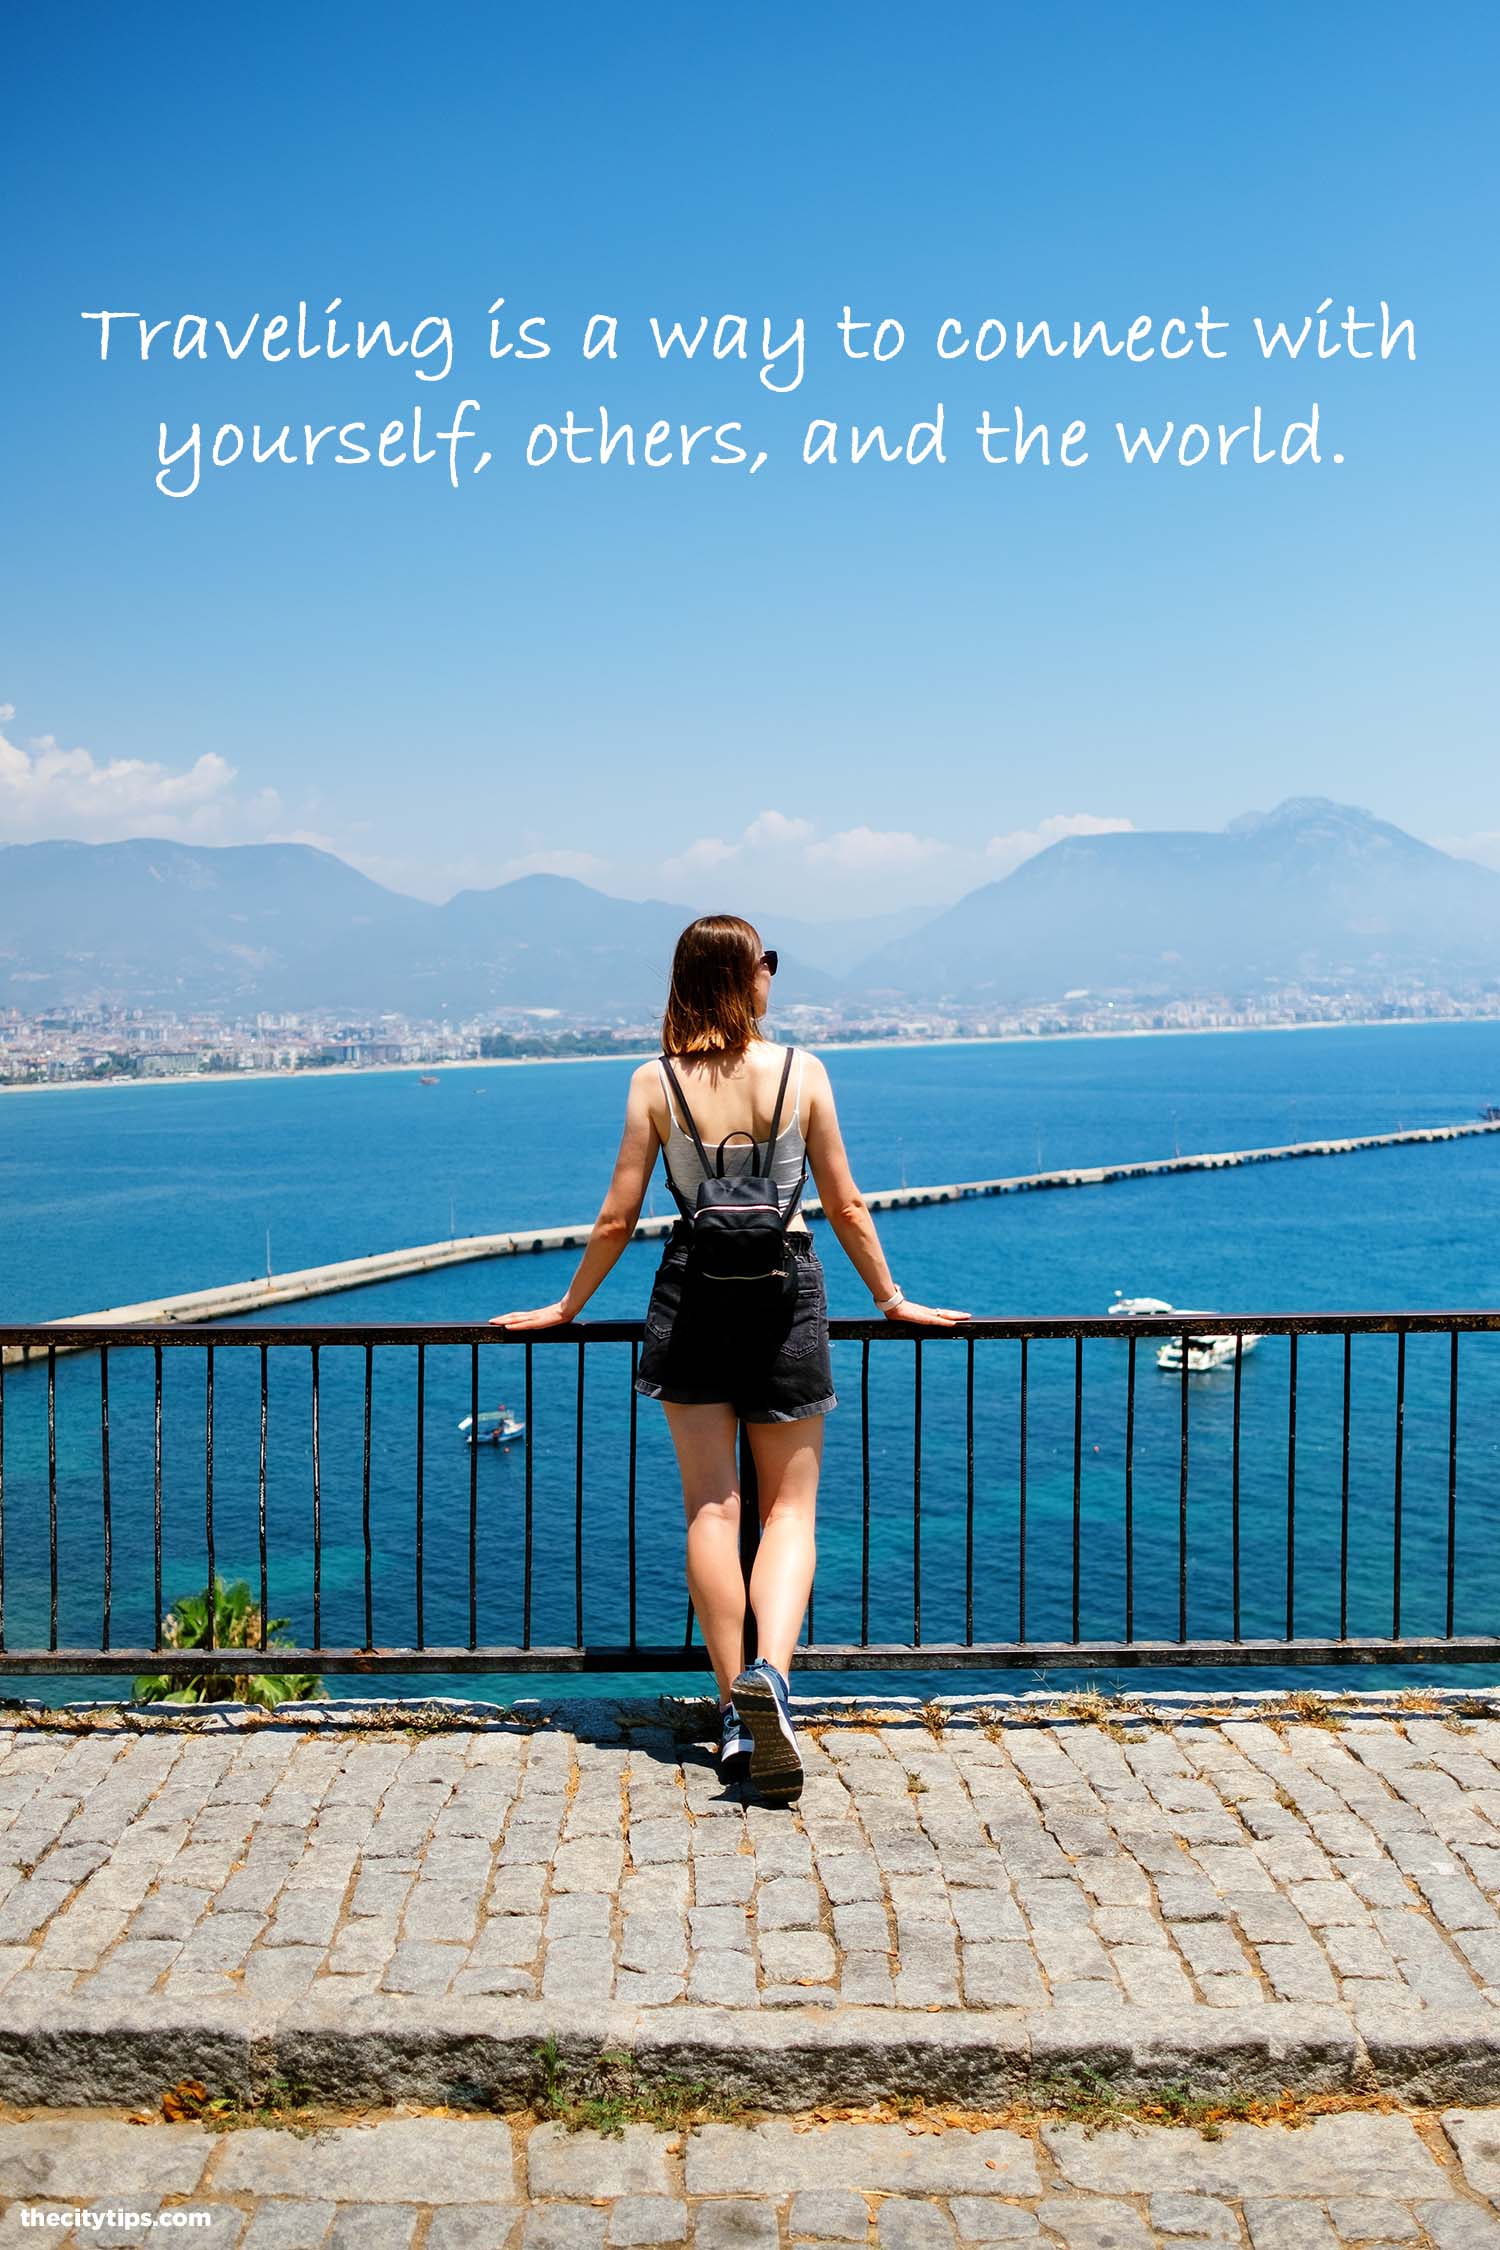 "Traveling is a way to connect with yourself, others, and the world." by Anonymous